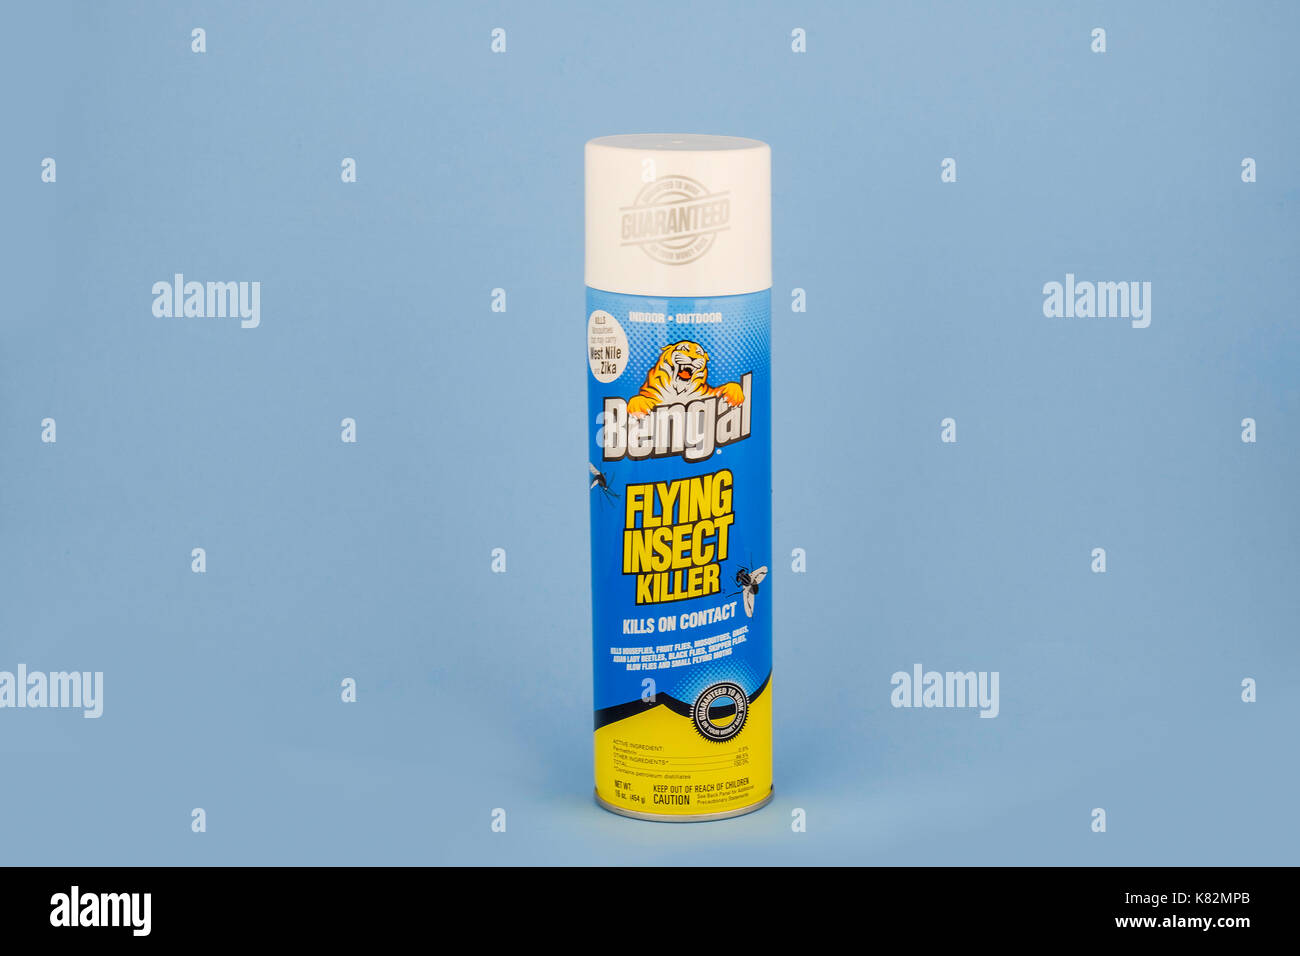 A spray can of Bengal Flying Insect Killer on a blue background. Oklahoma, USA. Stock Photo